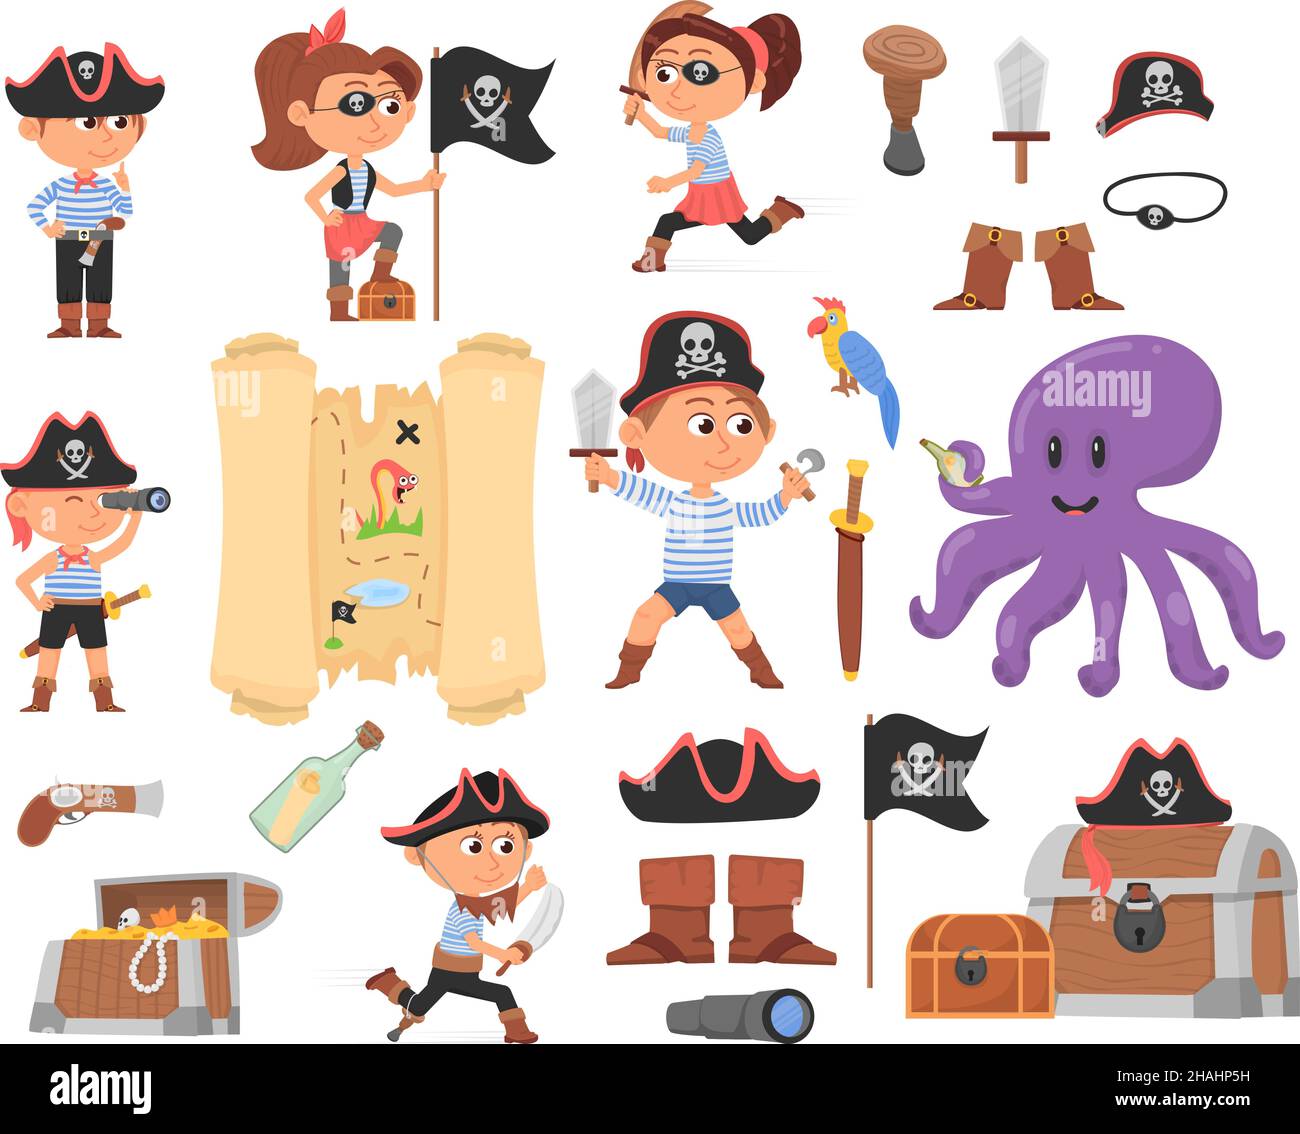 Cute cartoon pirates. Child pirate, kids wear party costume. Sea or ocean characters, treasure map, wooden chest. Isolated happy playing children Stock Vector